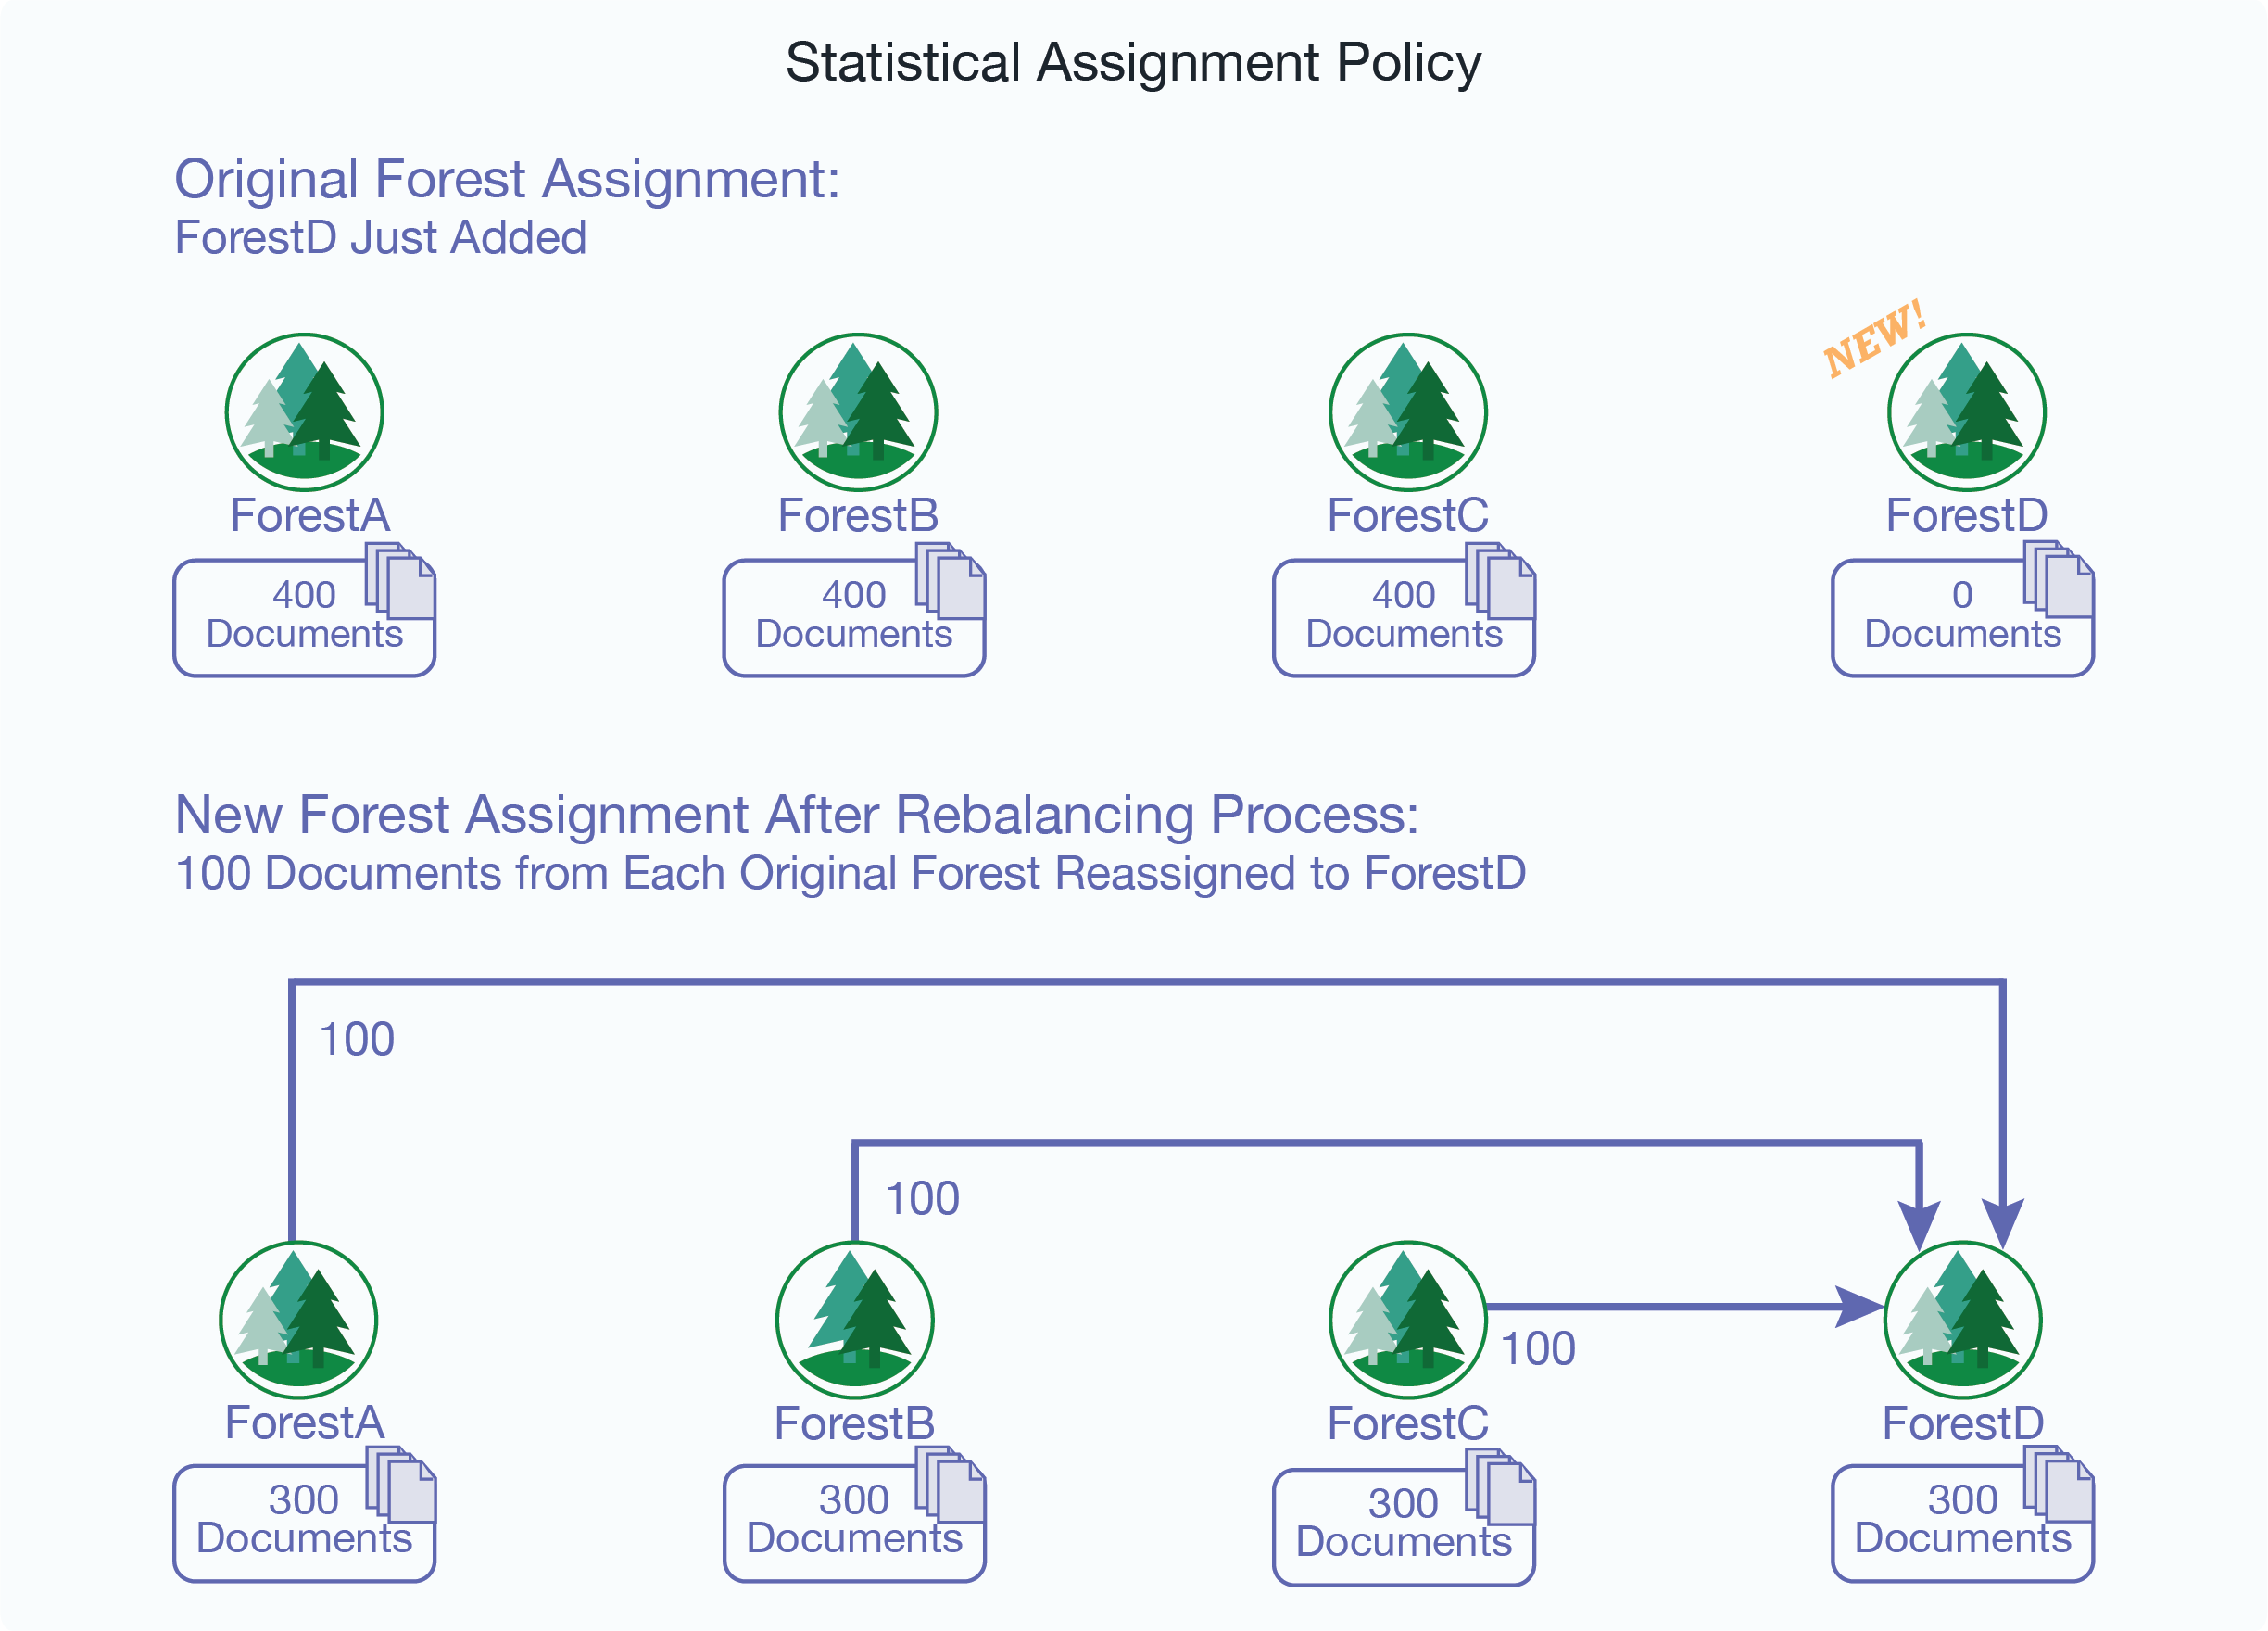 Figure showing a new forest, ForestD, added to the database that already has three forests: ForestA, ForestB, and ForestC, each contains 400 documents. Each of the existing forests move 100 documents to the new forest, ForestD.